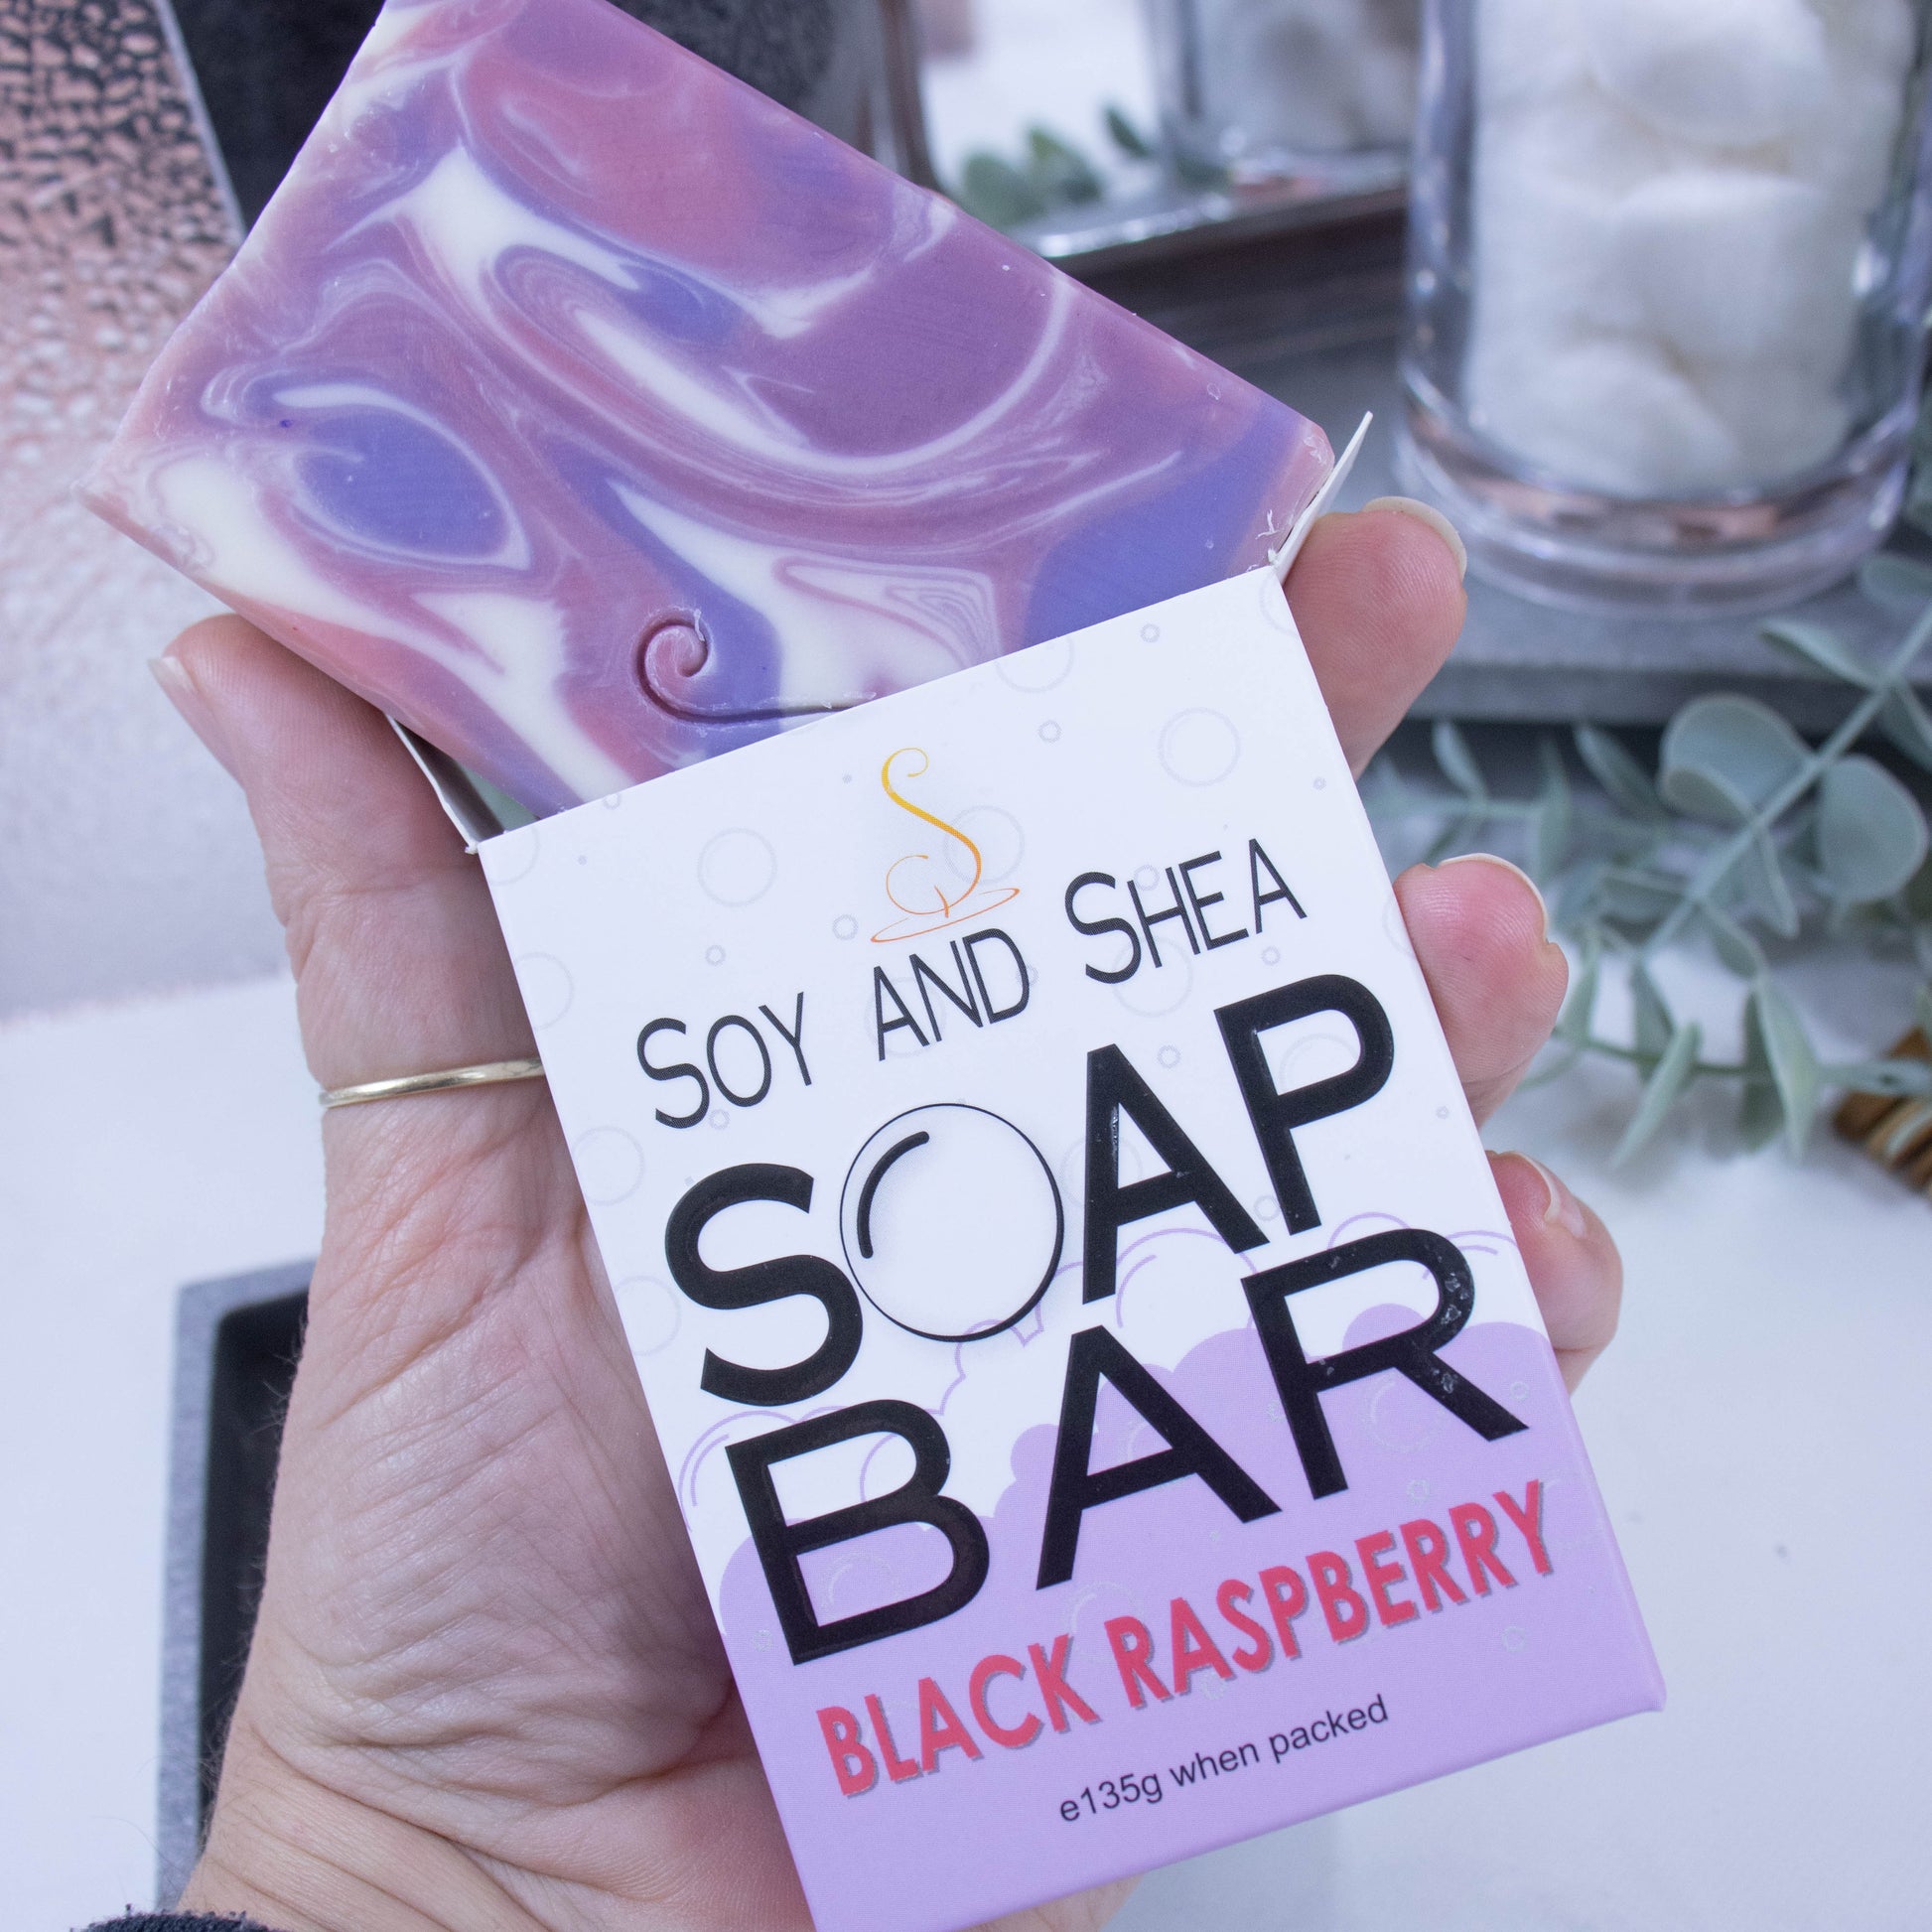 A hand is holding onto a box that has a bar of soap coming out the top.  The lower half of the box has a mauve bubble shaped border and the top is white with grey bubbles.  The box shows it is soap and the scent.  The soap is rectangular in shape and features a swirling pattern of white, pink  and purple.